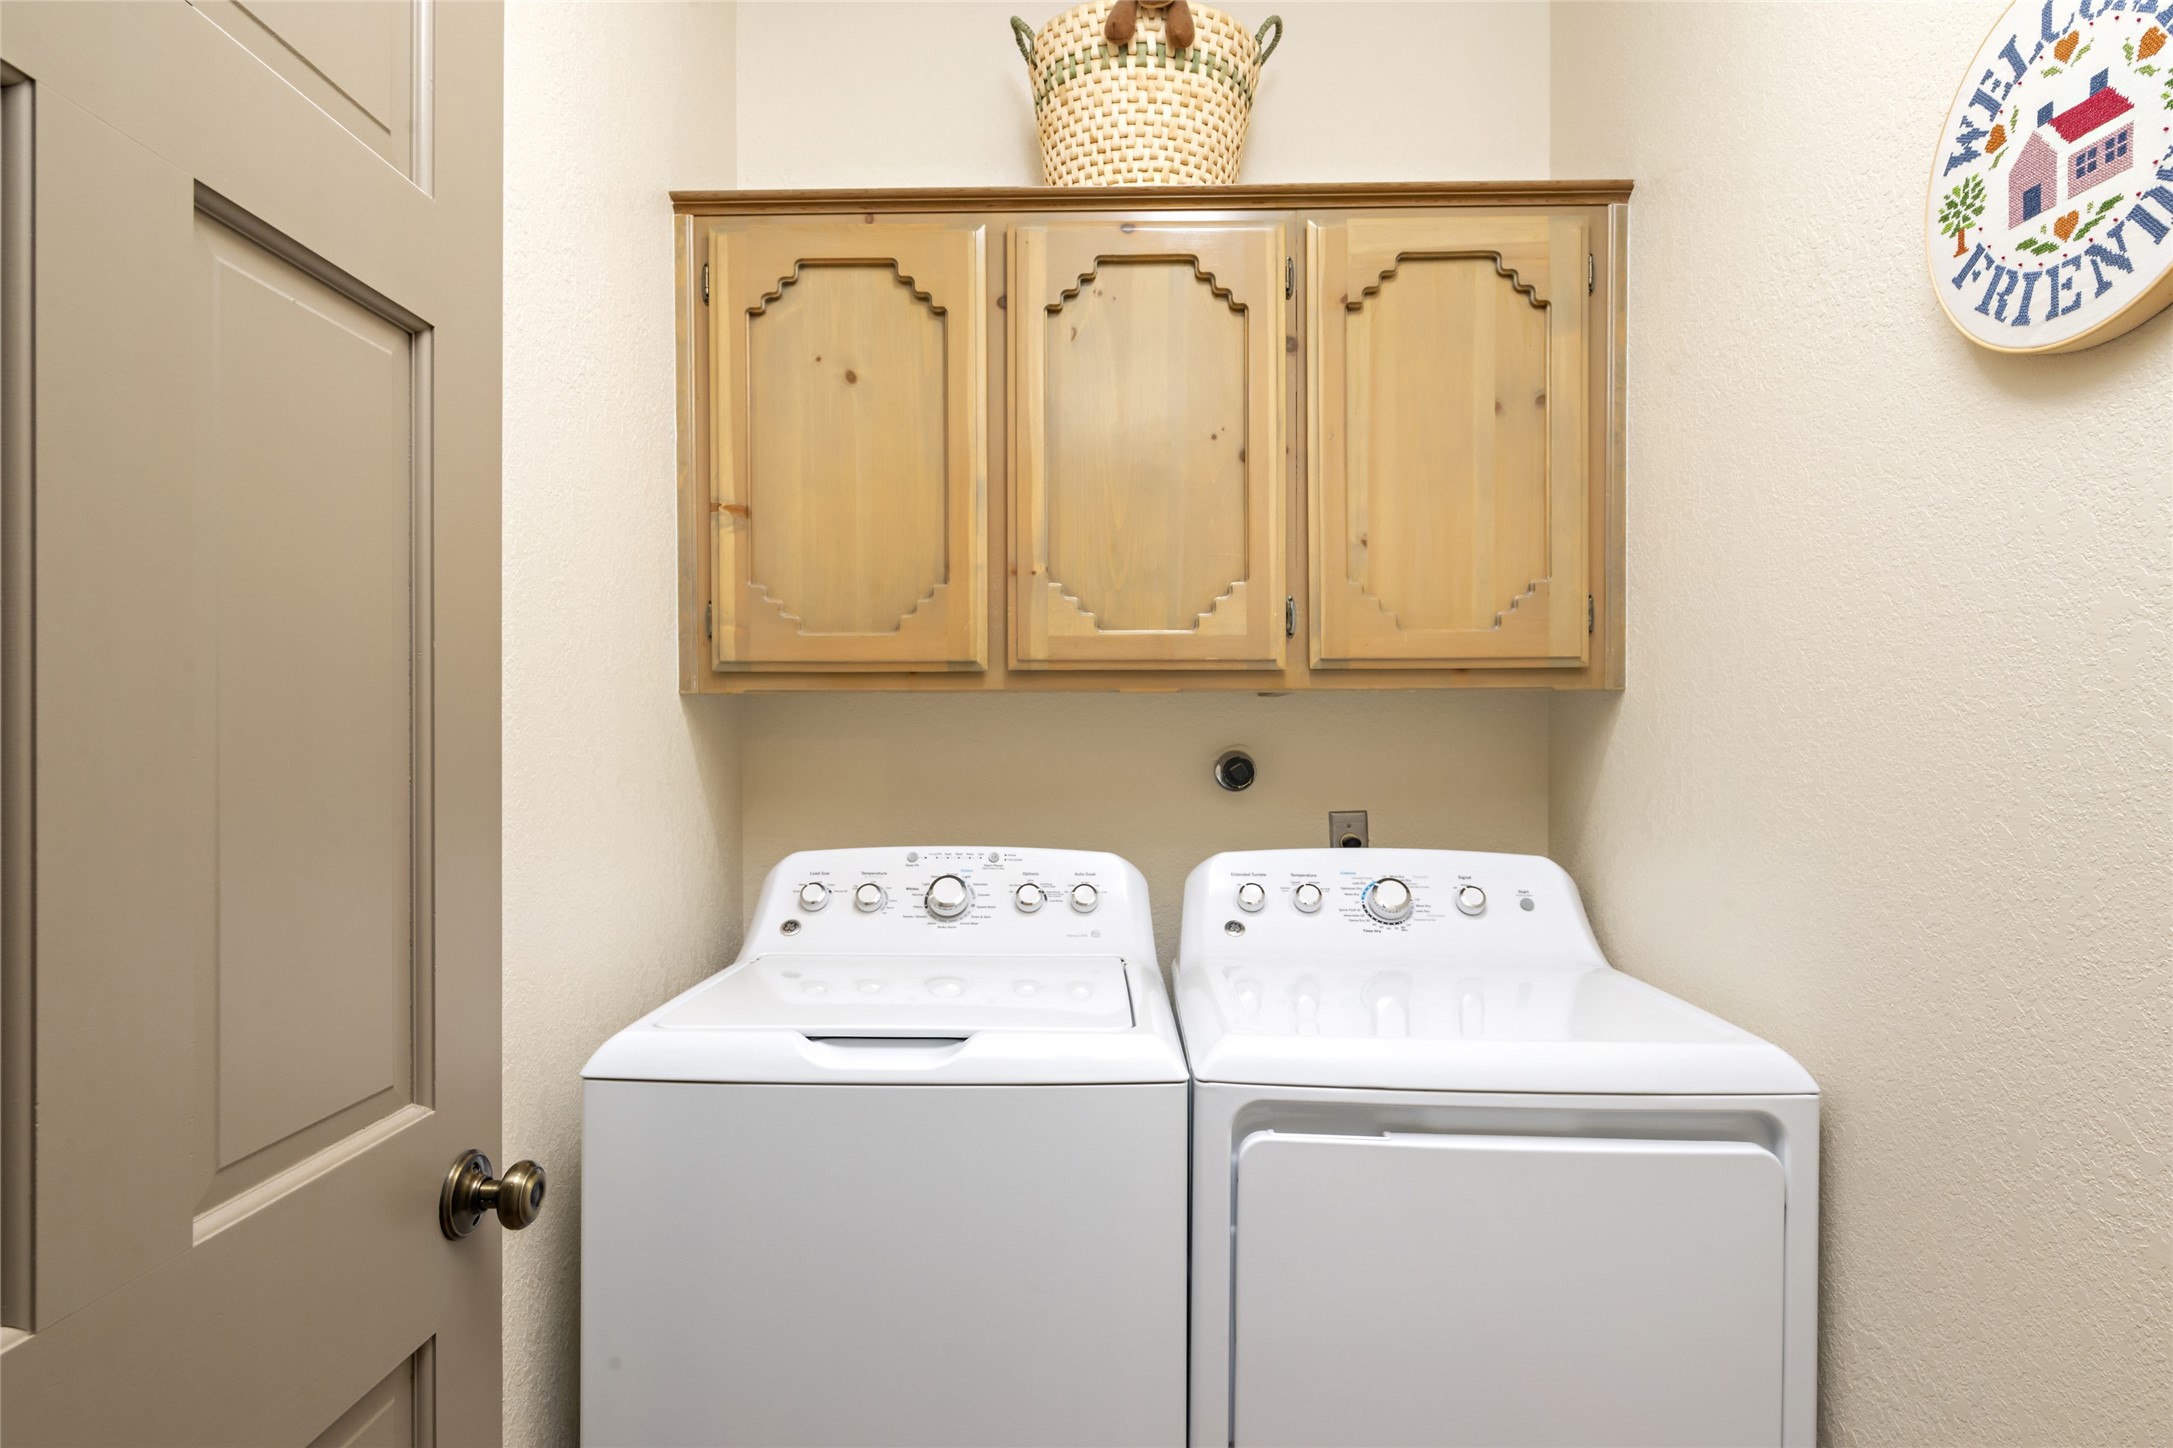 Proper laundry room with storage